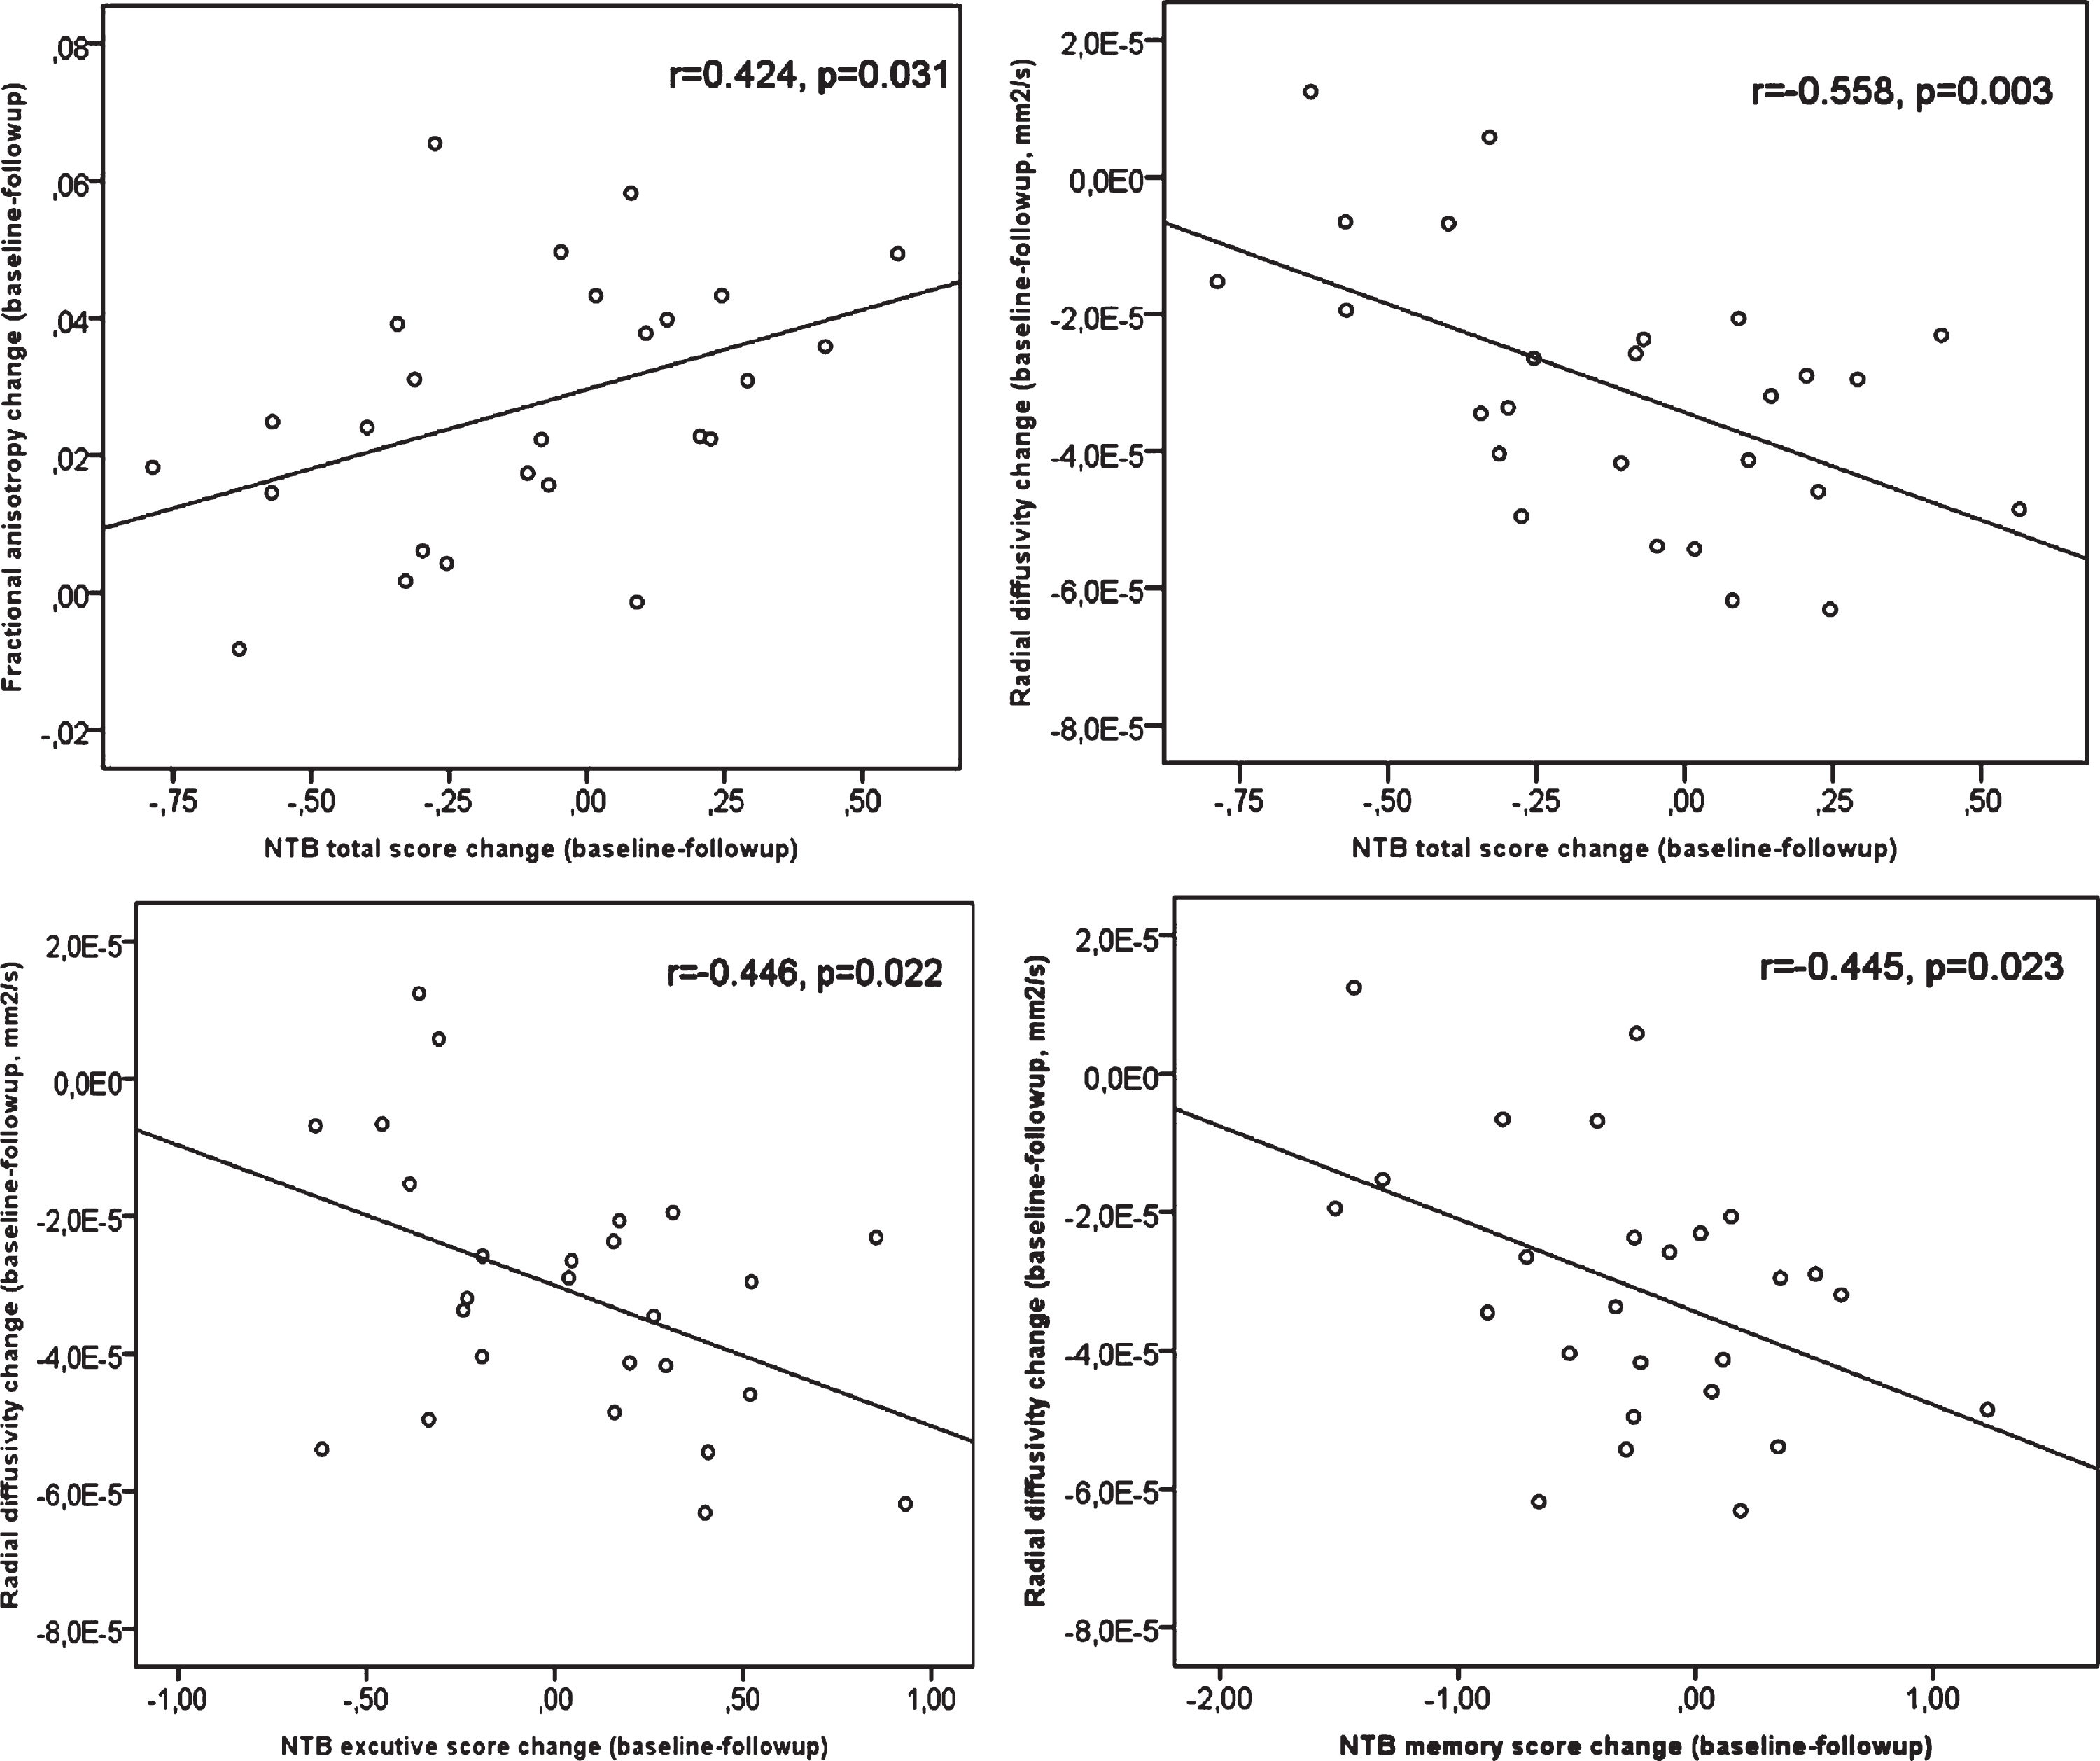 Control group: NTB (neuropsychological test battery) total score change (baseline-follow-up) positively correlated with fractional anisotropy (FA) change (baseline-follow-up), and negatively correlated with radial diffusivity (RD) change. NTB executive score change and memory score change negatively correlated with RD change. No correlation between cognitive changes and mean diffusivity (MD) or axial diffusivity (AxD) changes were found (p≥0.189).